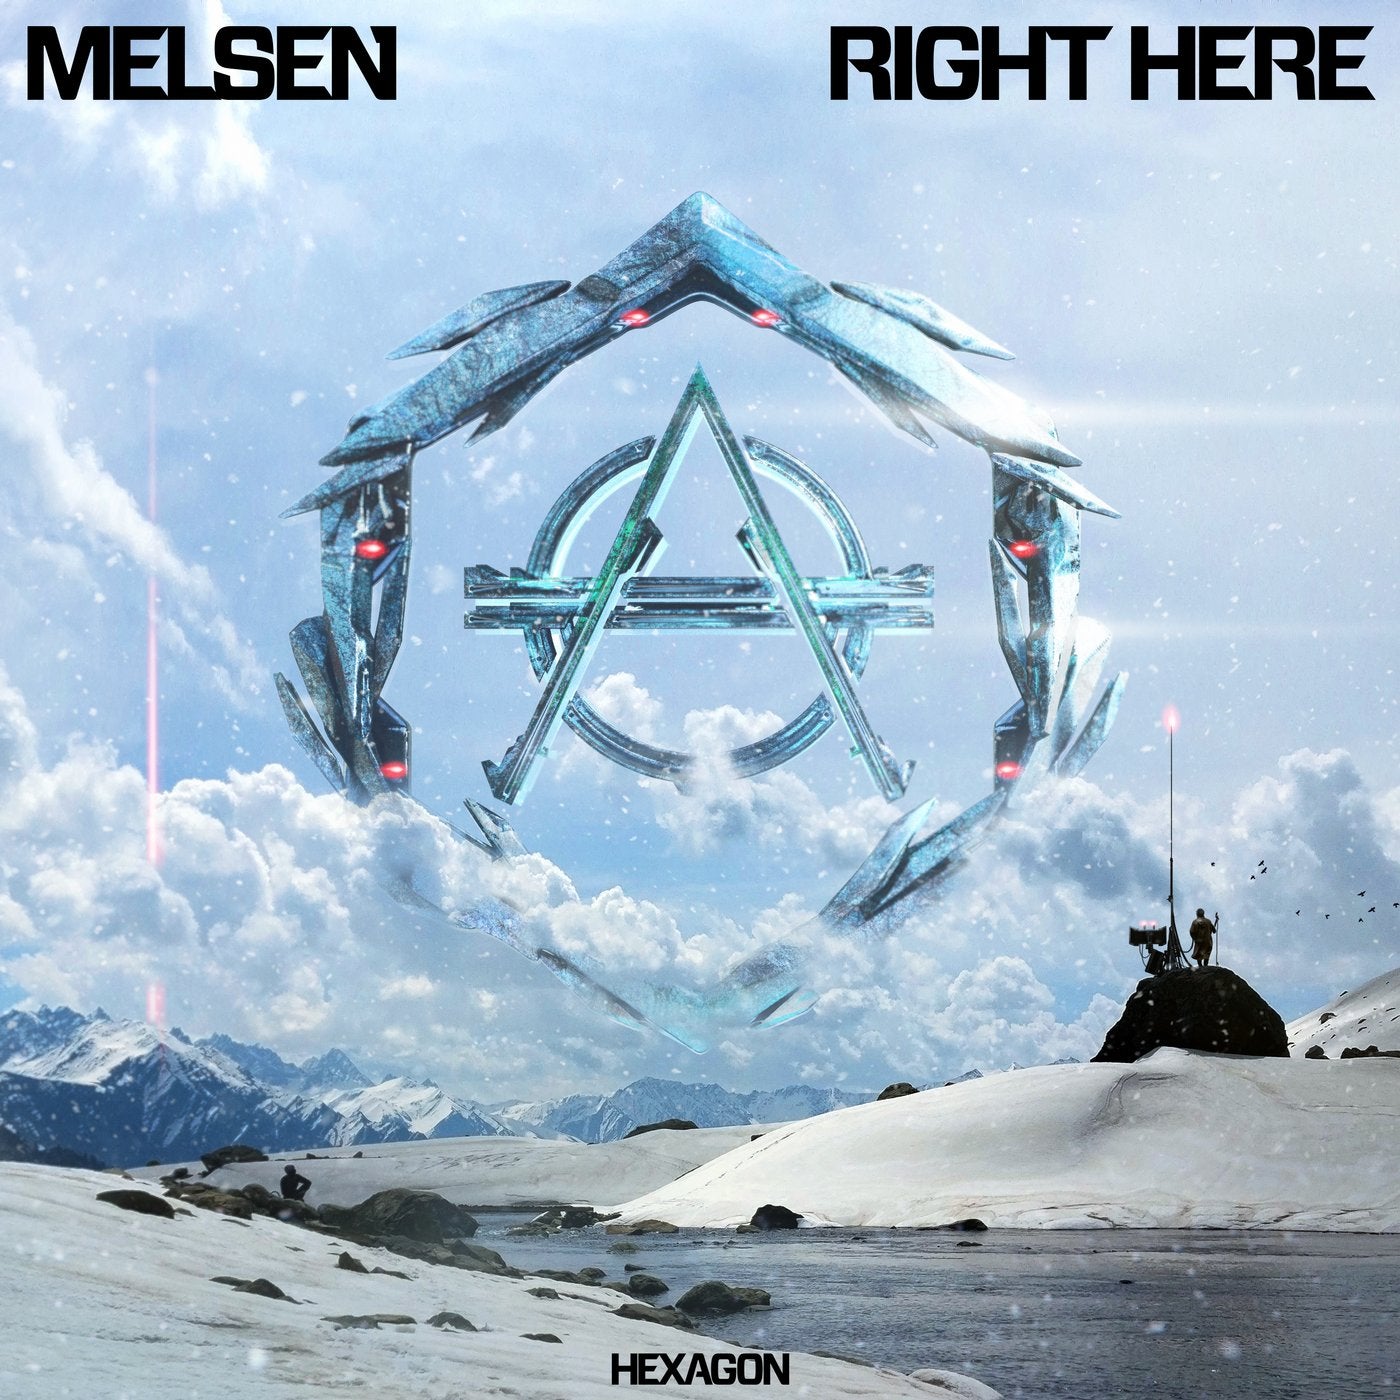 Right stone. Melsen. Right here. Joe Stone. Melsen – know you better.